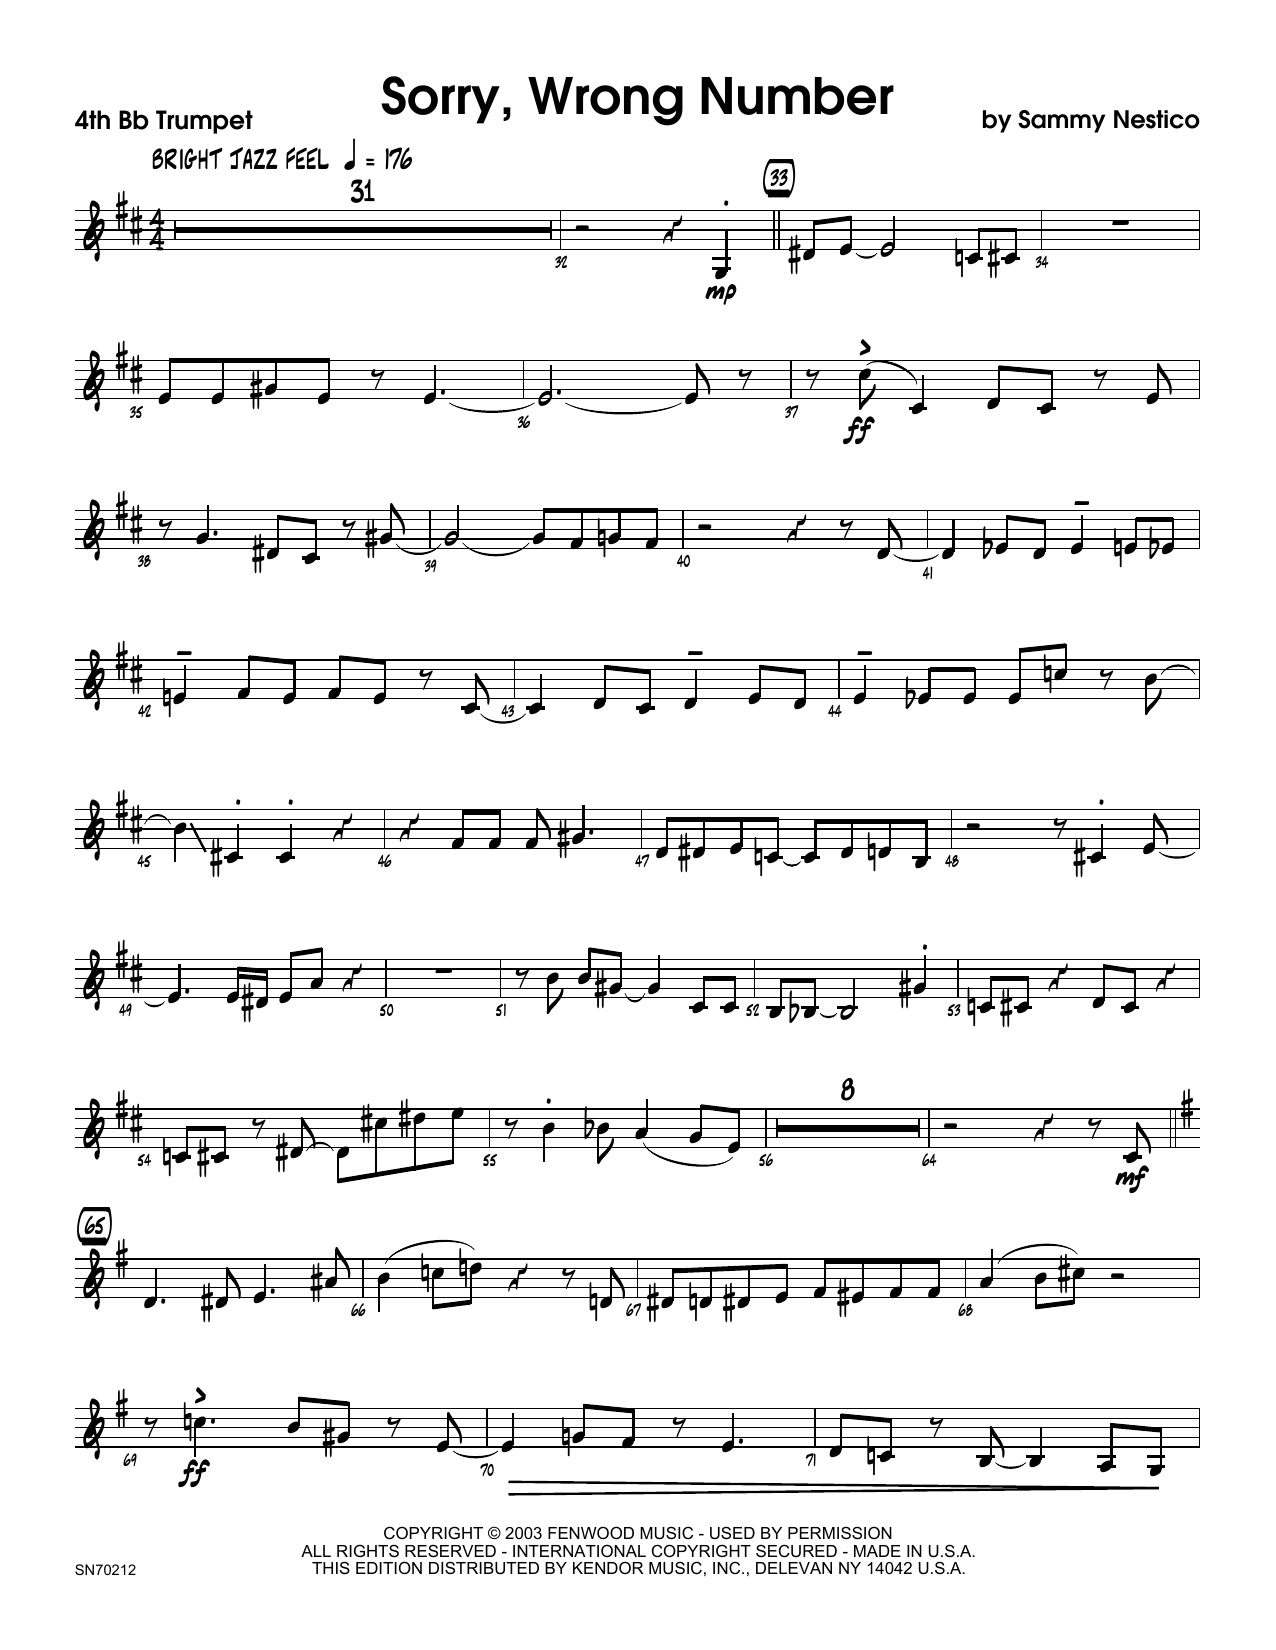 Download Sammy Nestico Sorry, Wrong Number - 4th Bb Trumpet Sheet Music